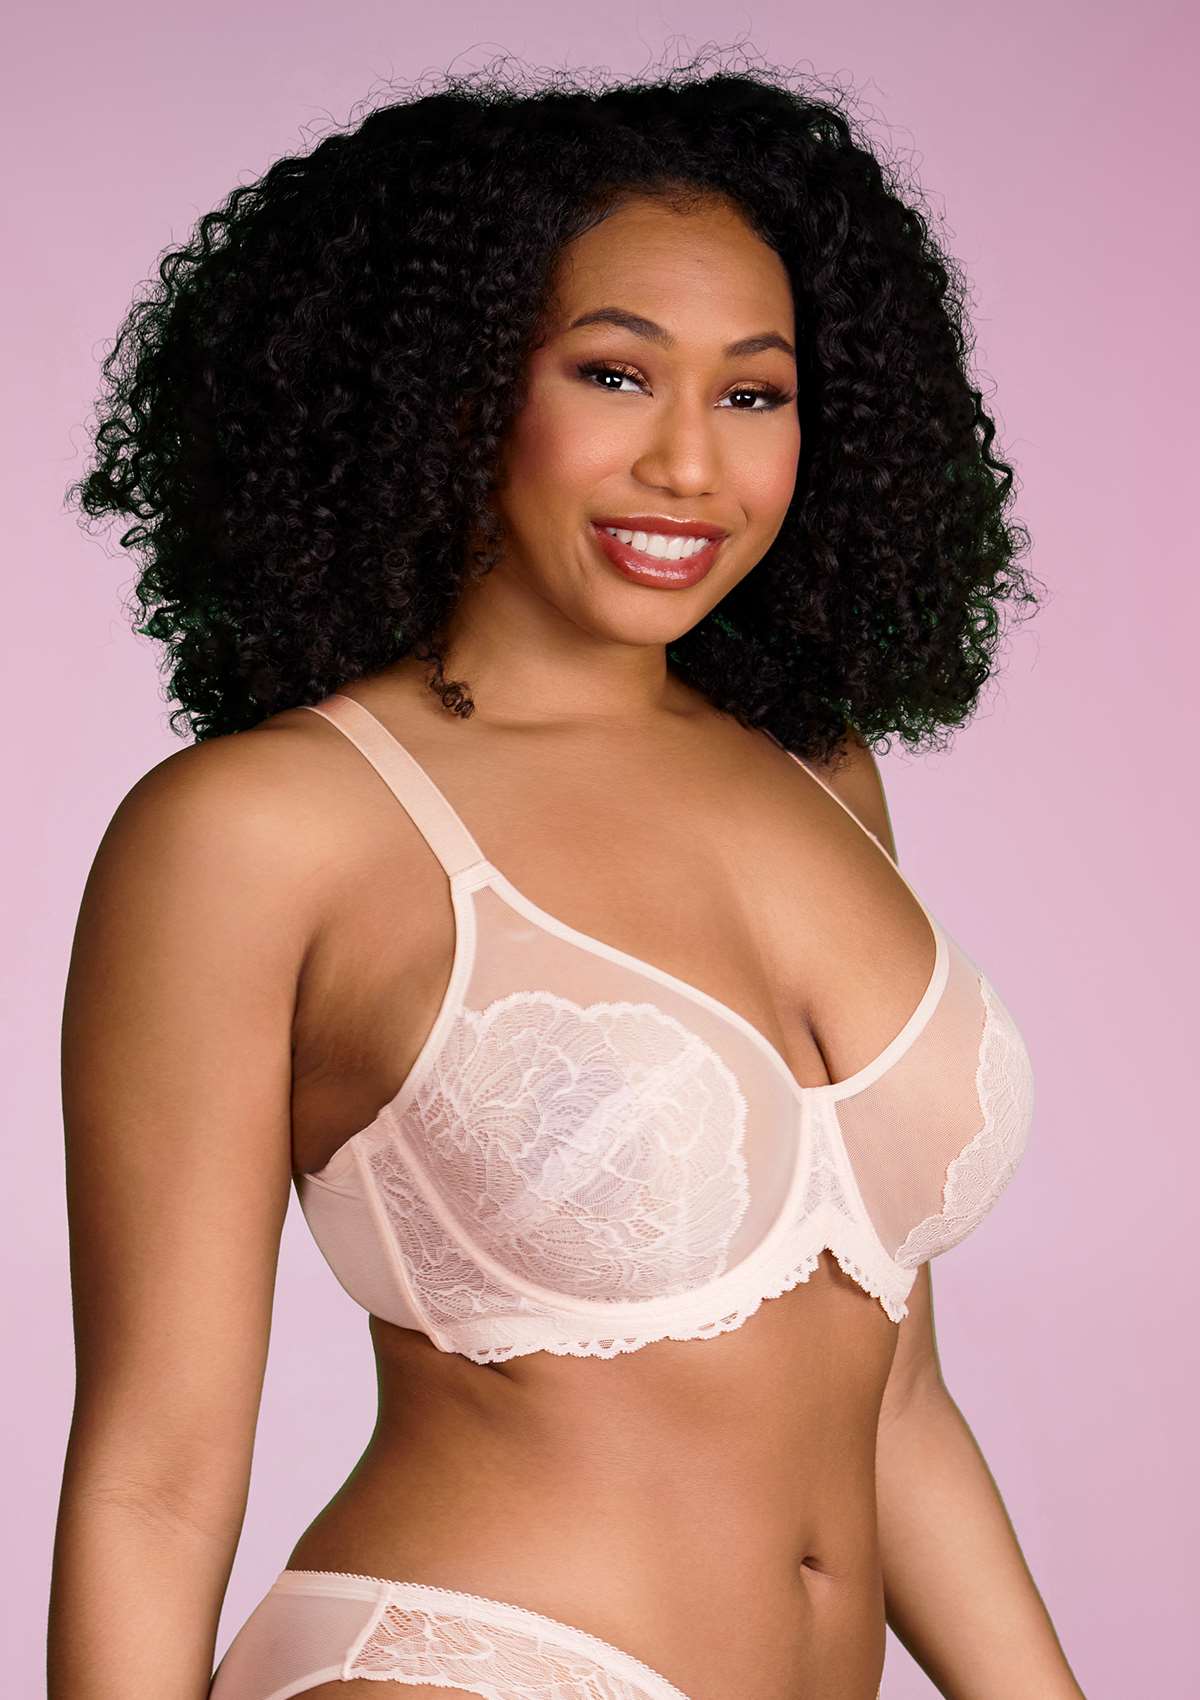 HSIA Blossom Sheer Lace Bra: Comfortable Underwire Bra For Big Busts - White / 46 / C